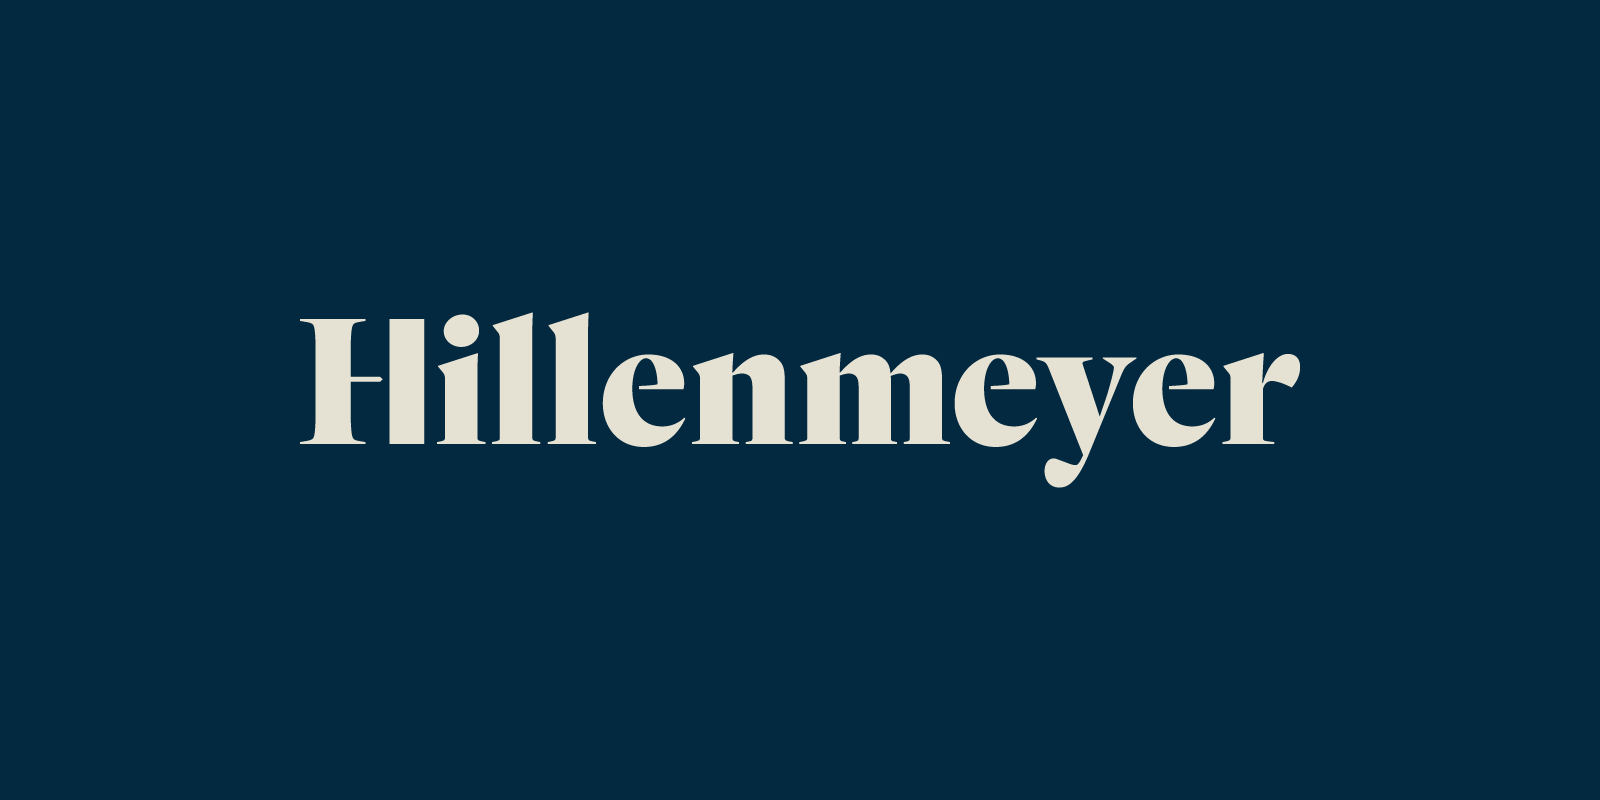 Brand Identity for Hillenmeyer Landscaping By Bullhorn Creative